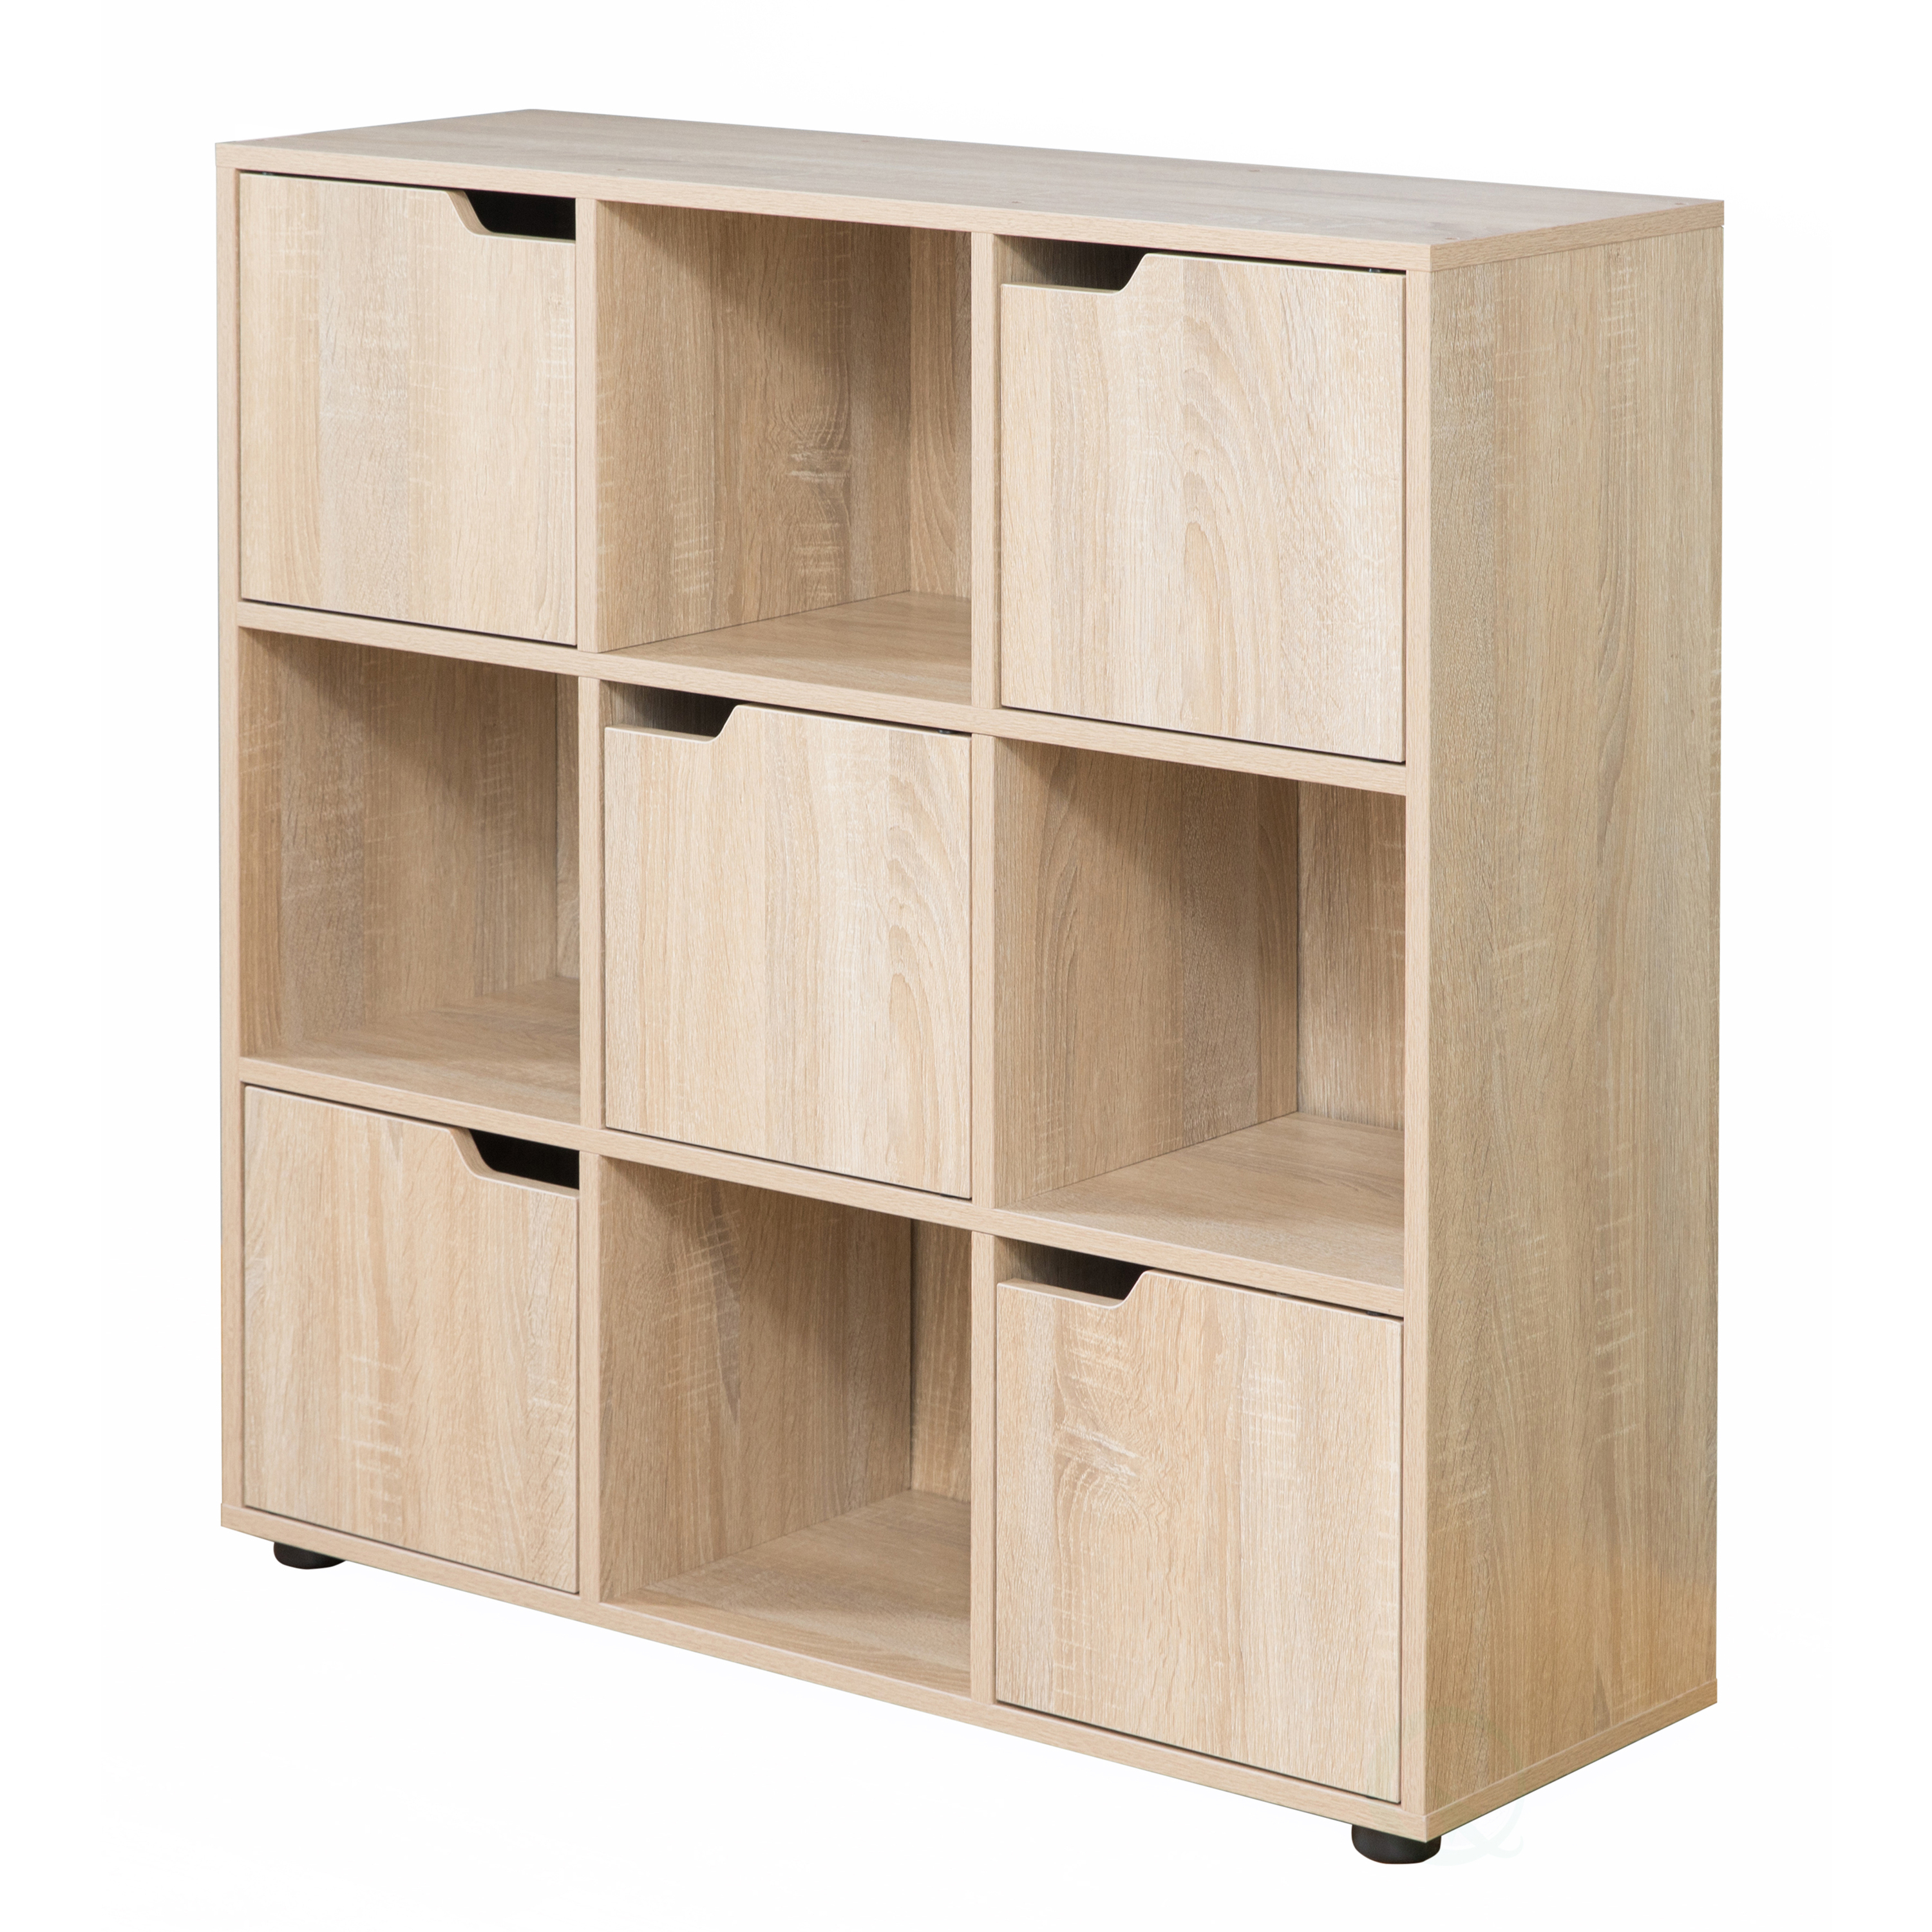 9 Cube Wooden Organizer With 5 Enclosed Doors and 4 Shelves - oak